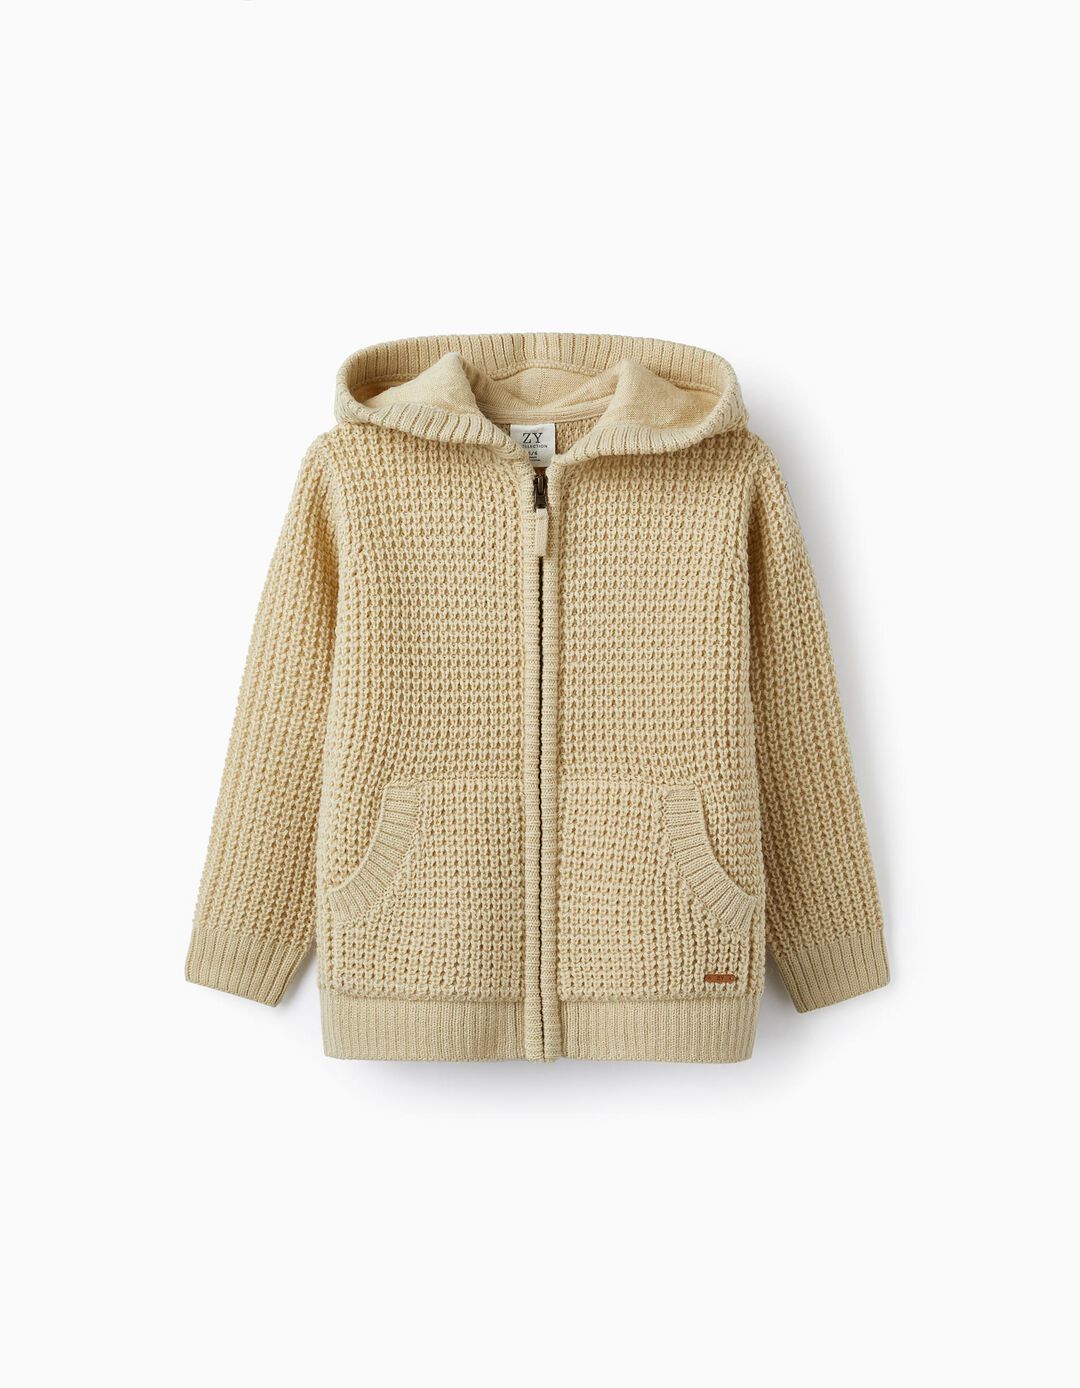 Knit Jacket with Hood for Boys, Beige